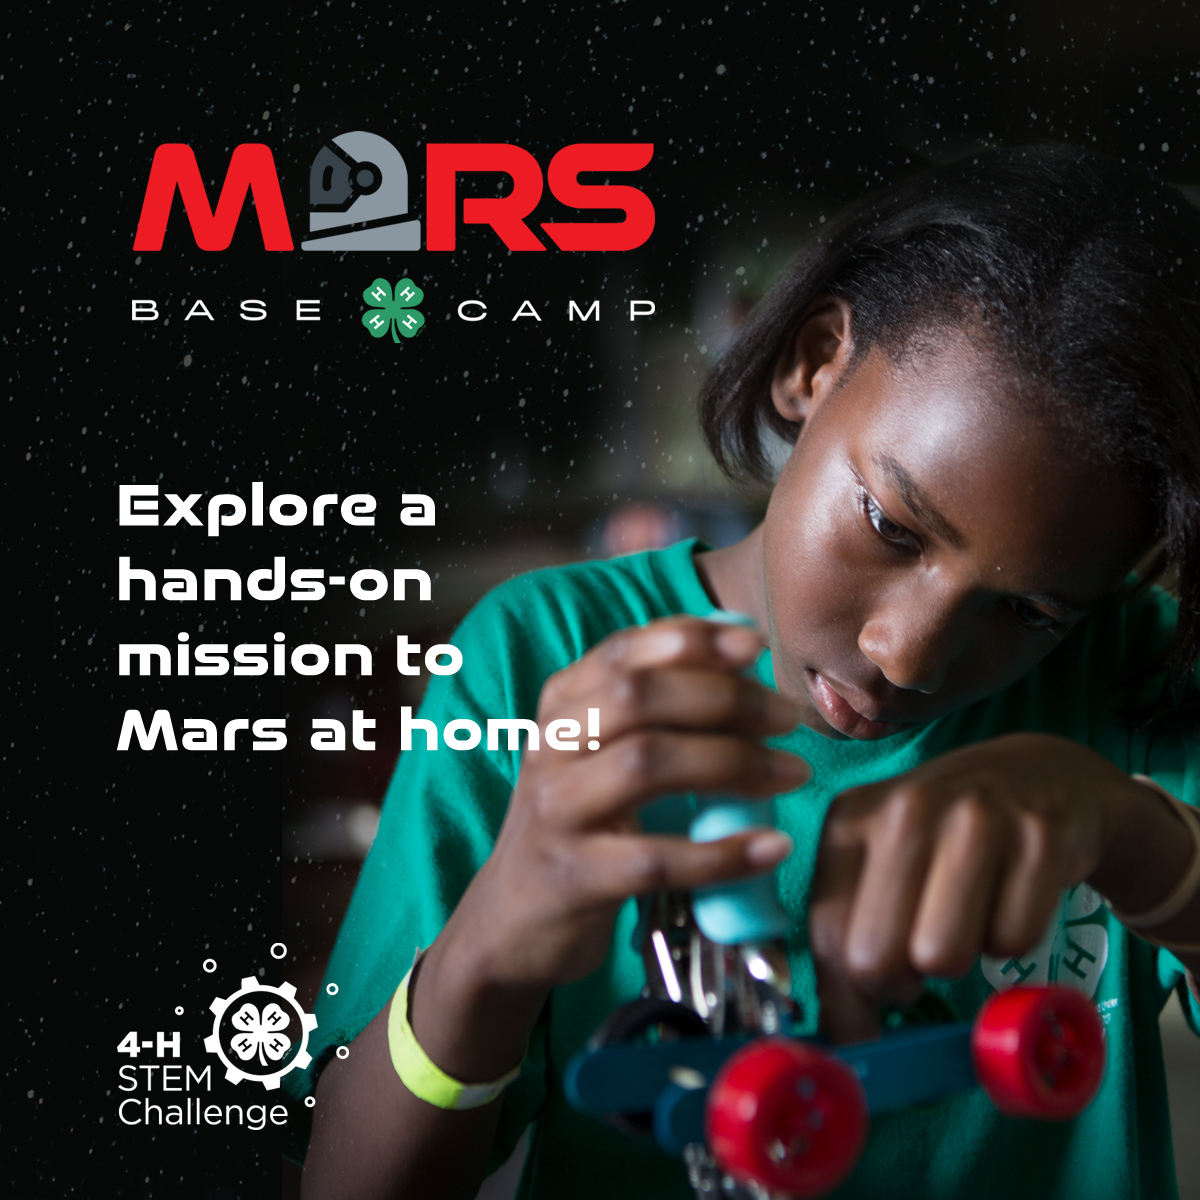 Girl building car and Mars Base Camp text